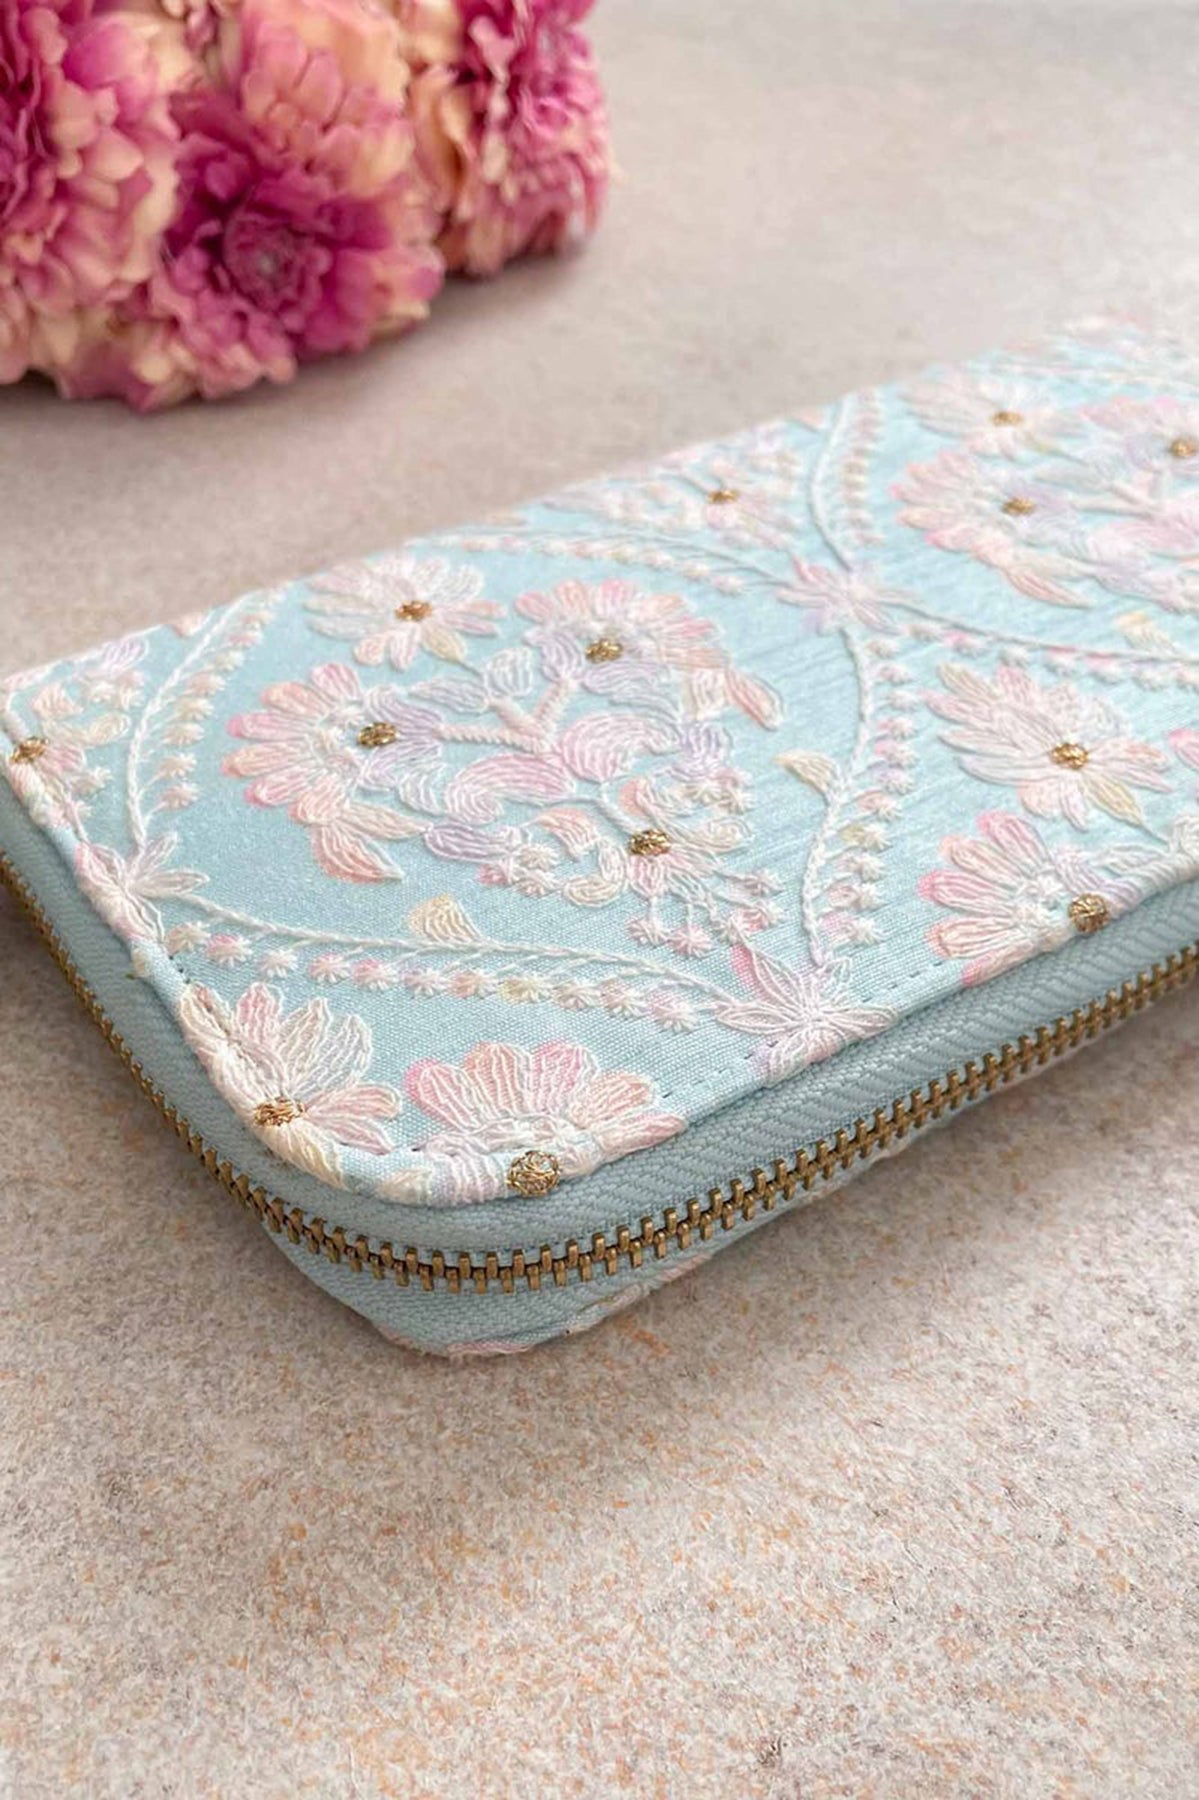 Anaqat Silk Embroidered Wallet Baby Blue